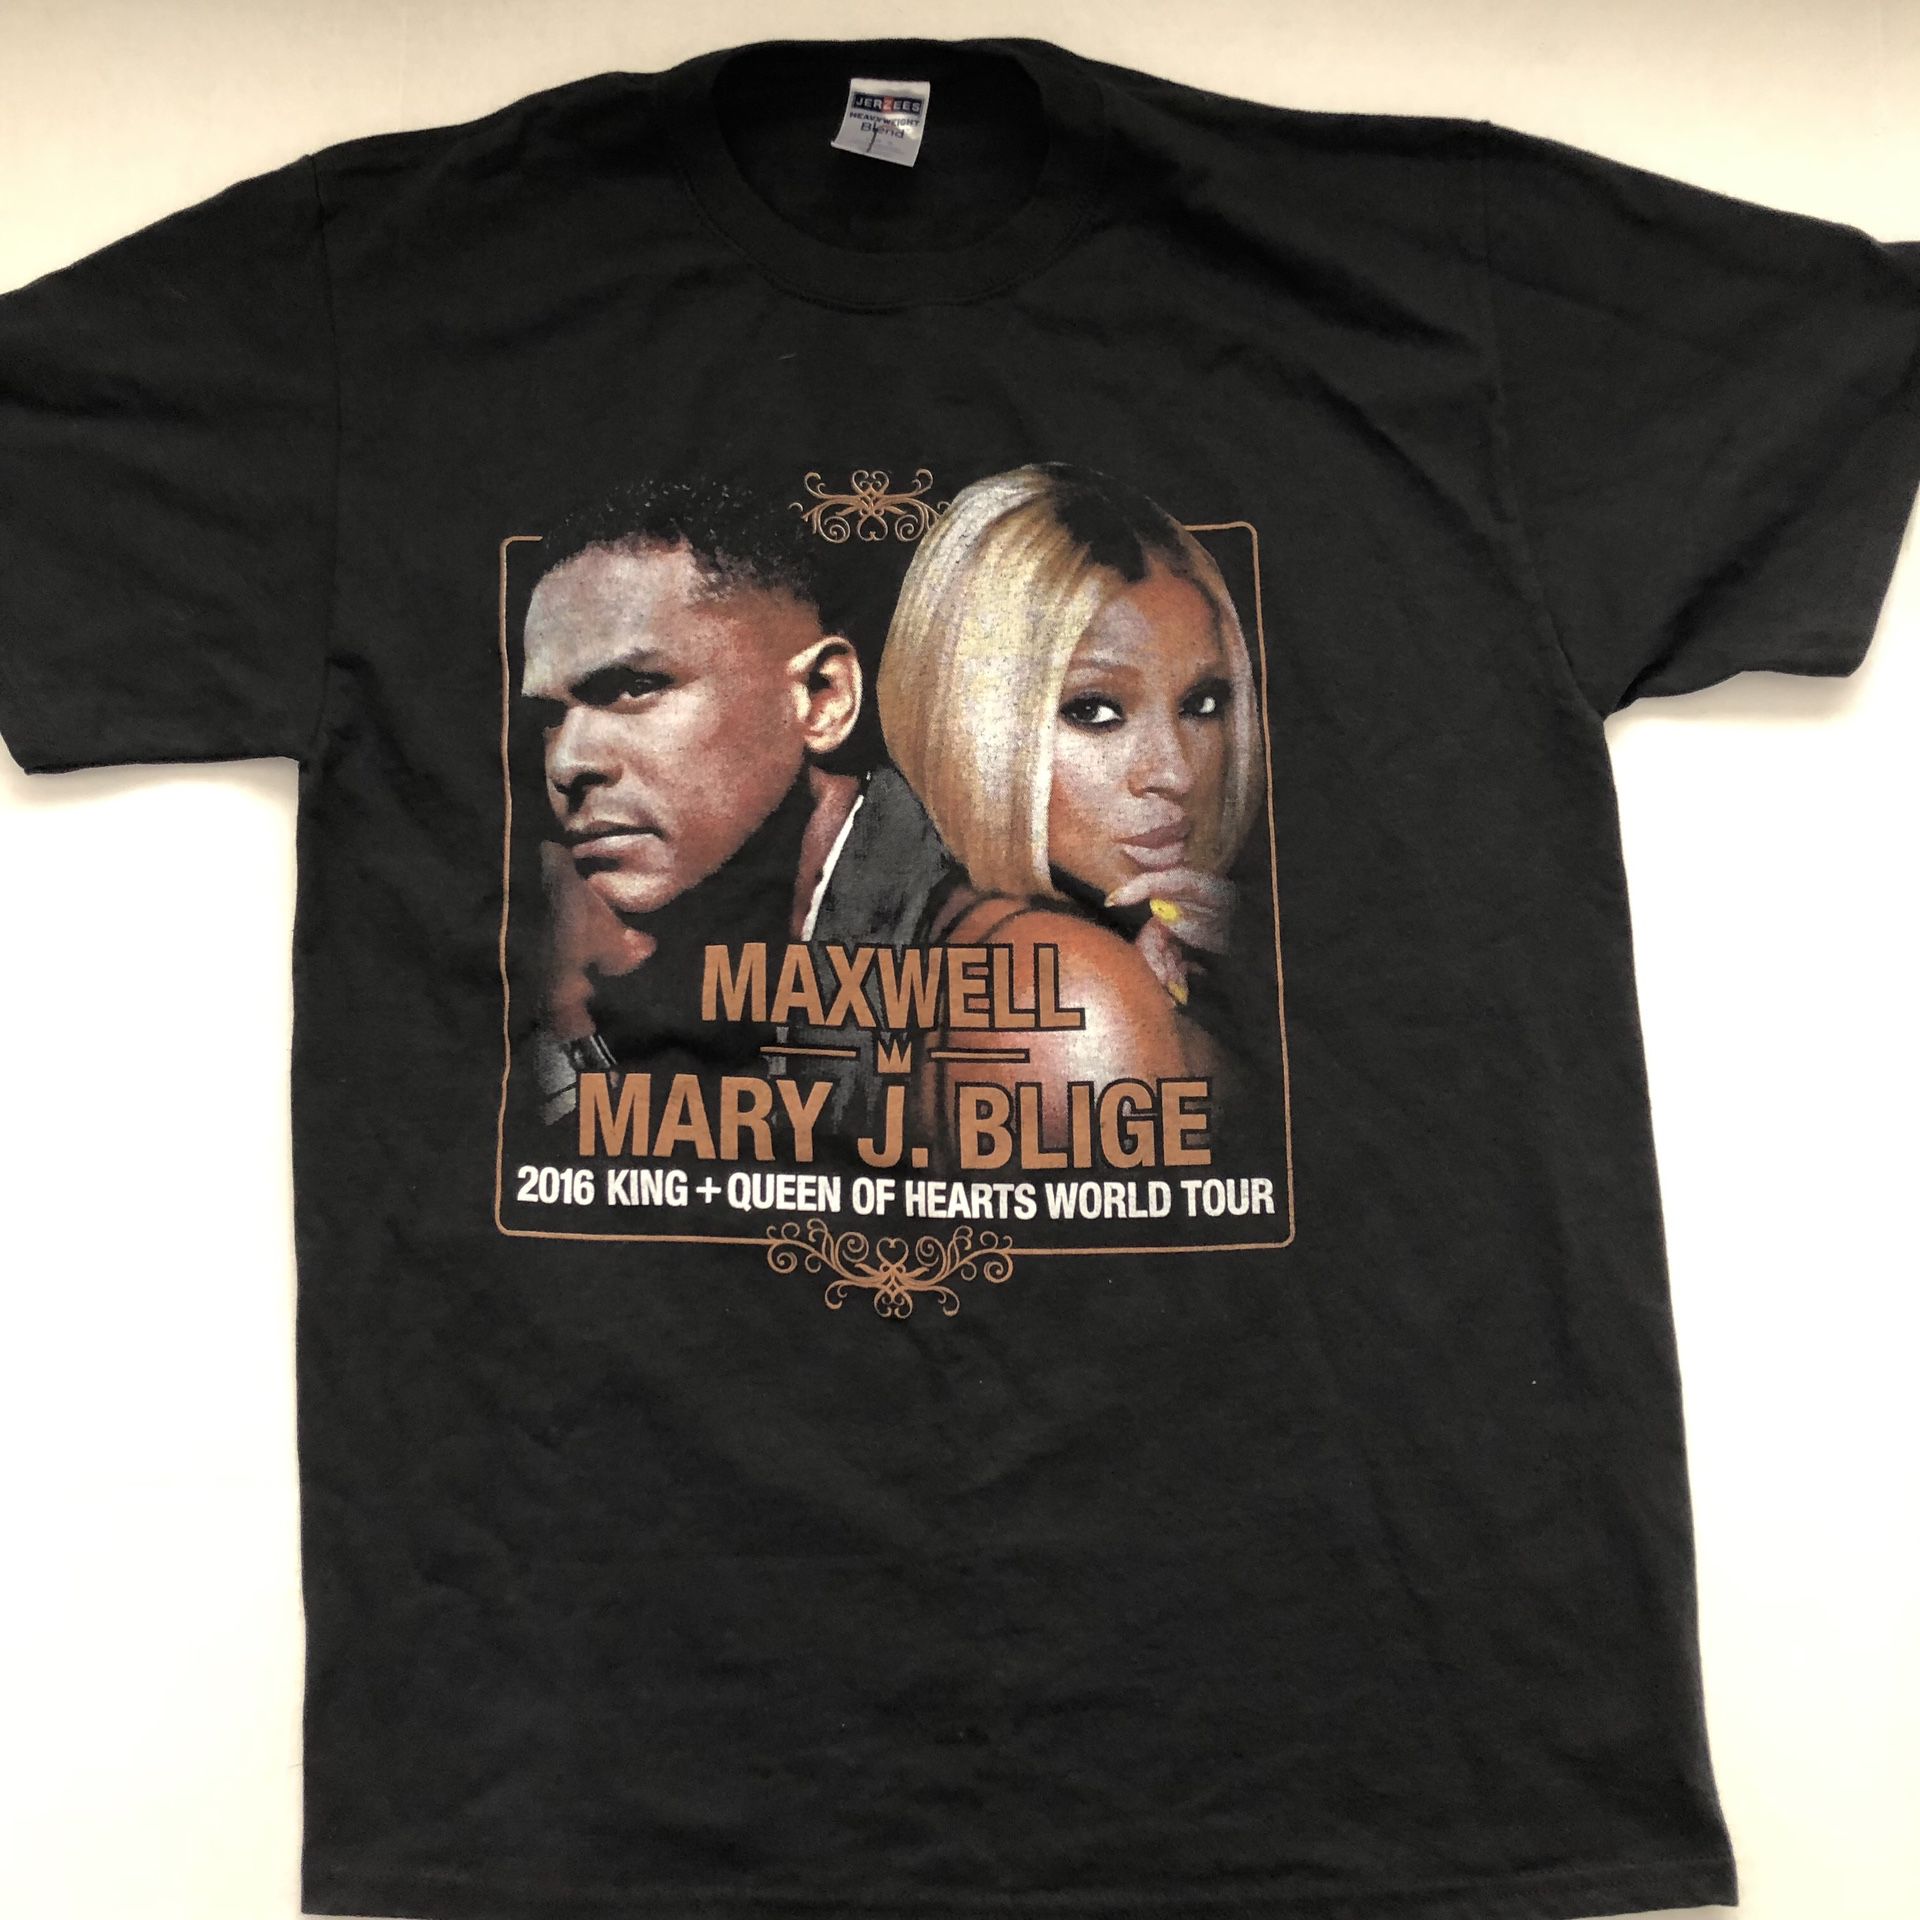 Mary J Blige Maxwell Queen of Hearts tour t shirt tee size Large